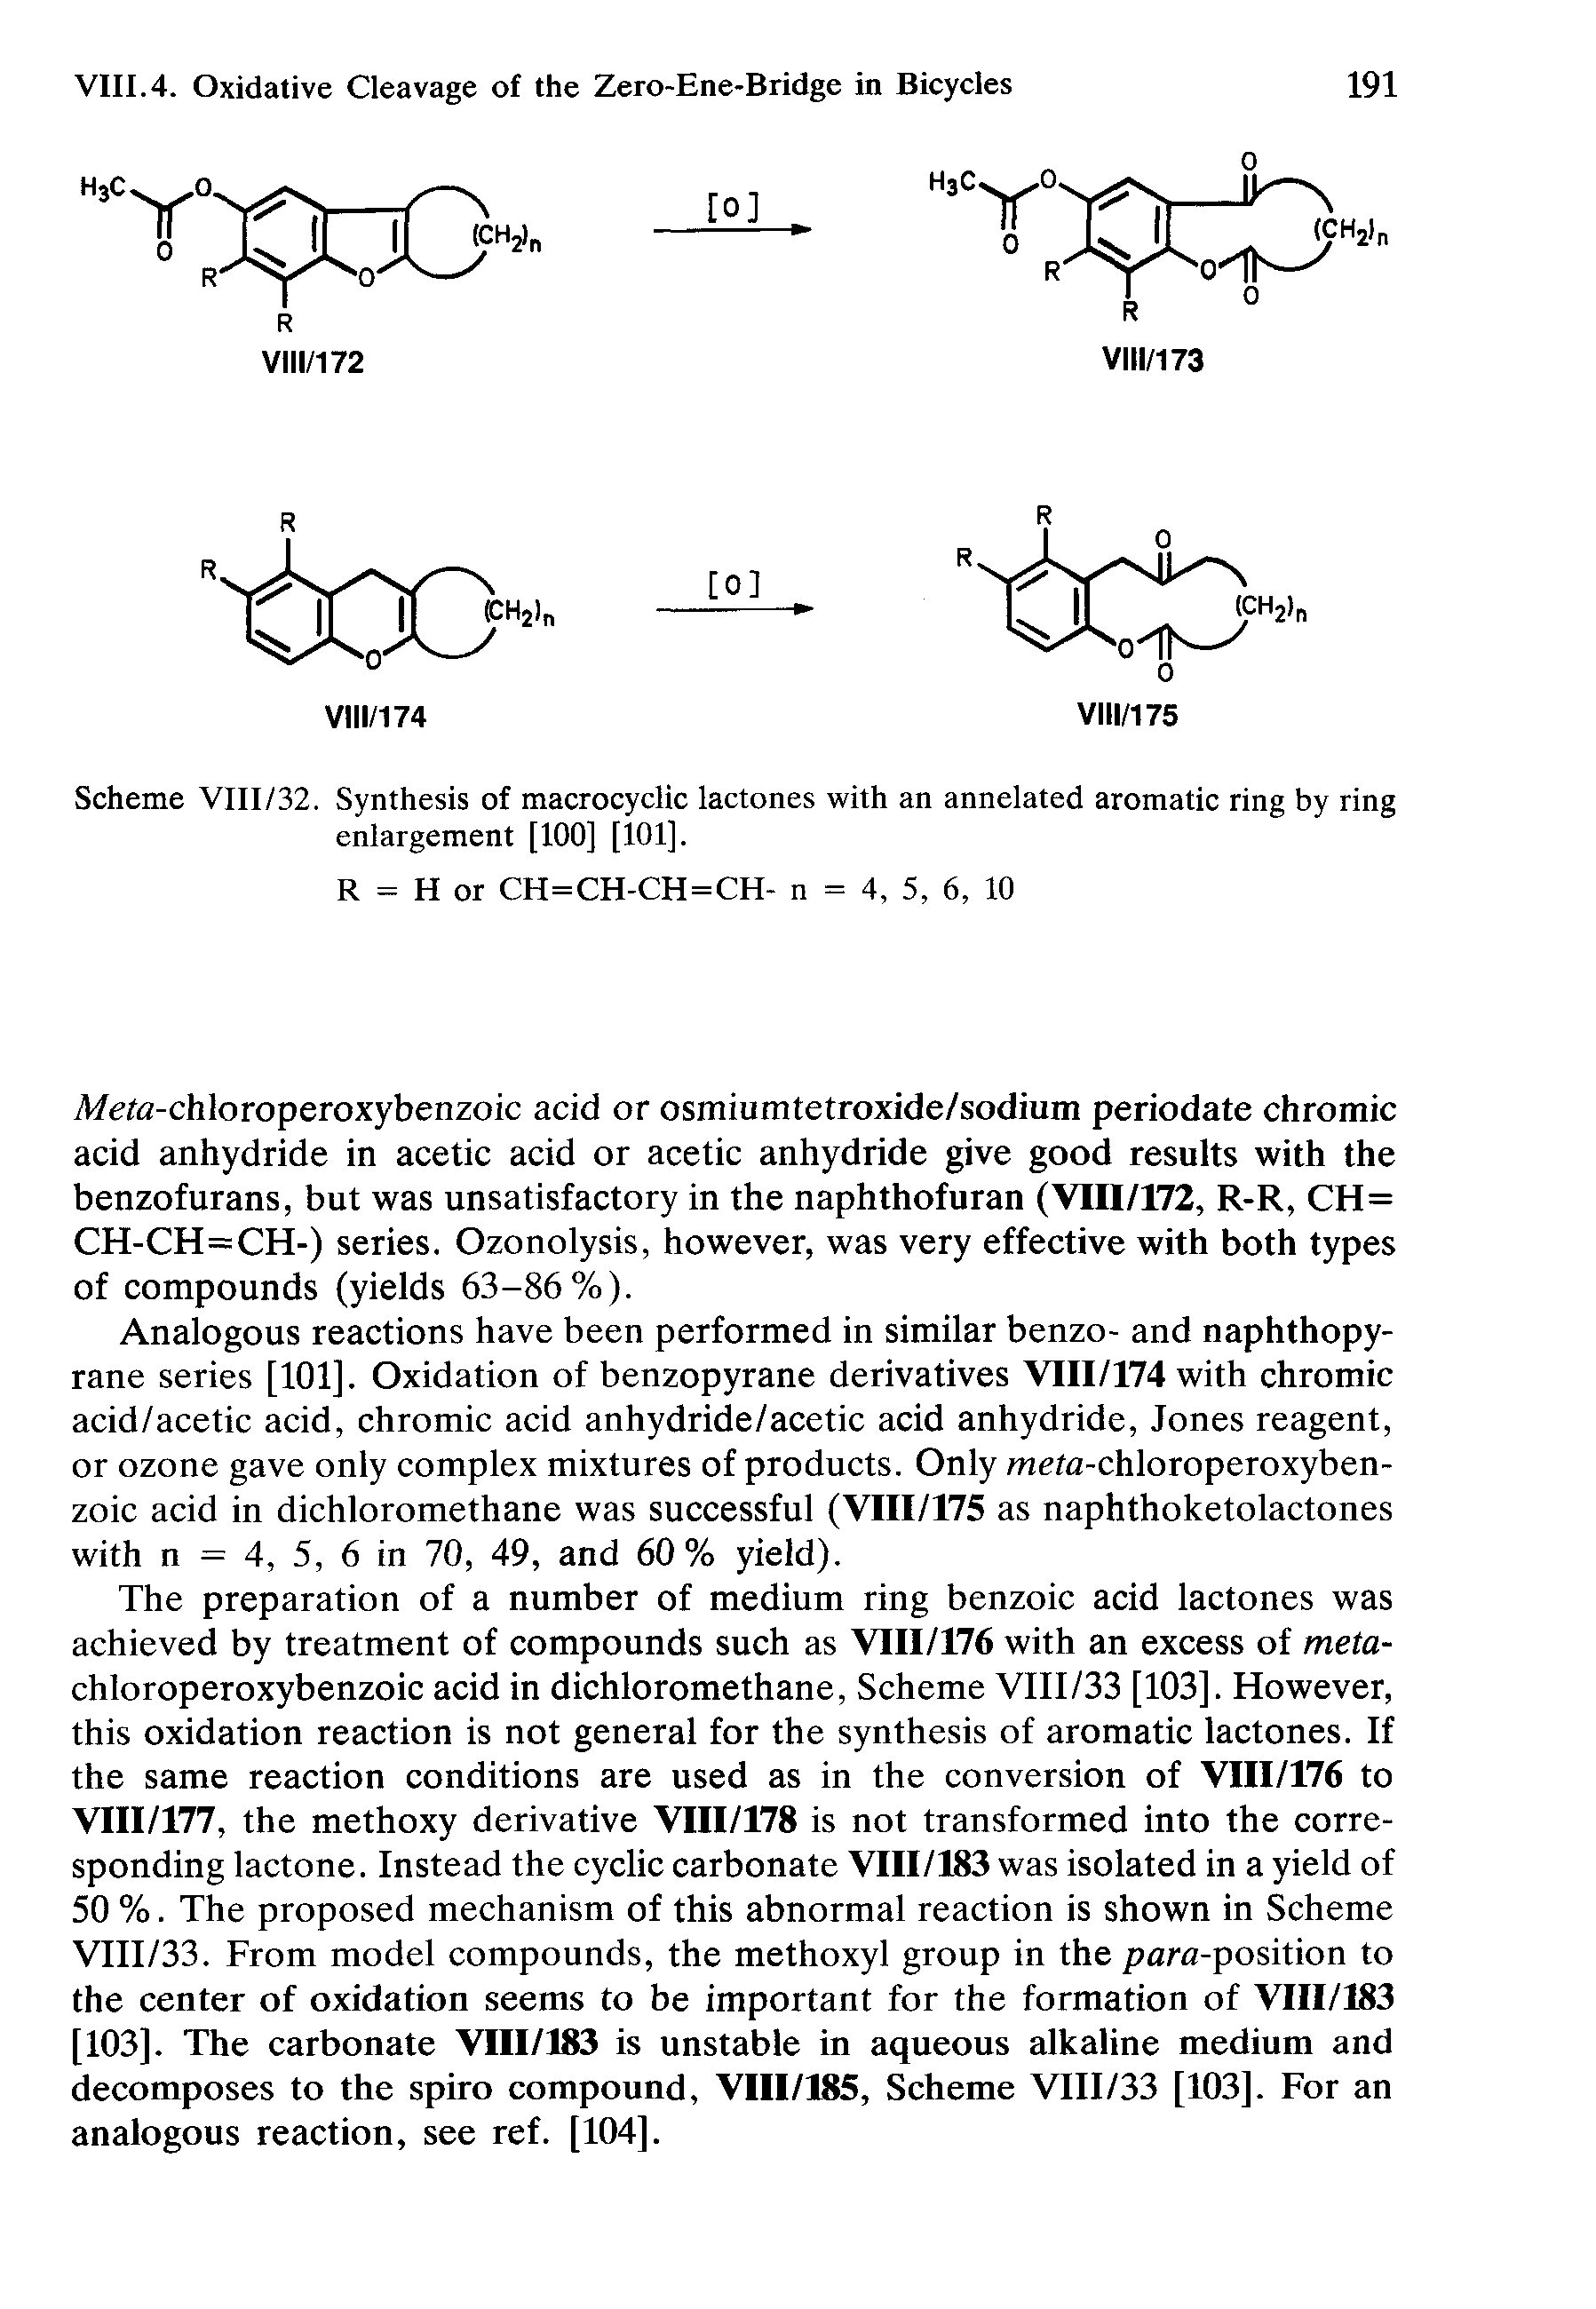 Scheme VIII/32. Synthesis of macrocyclic lactones with an annelated aromatic ring by ring enlargement [100] [101].